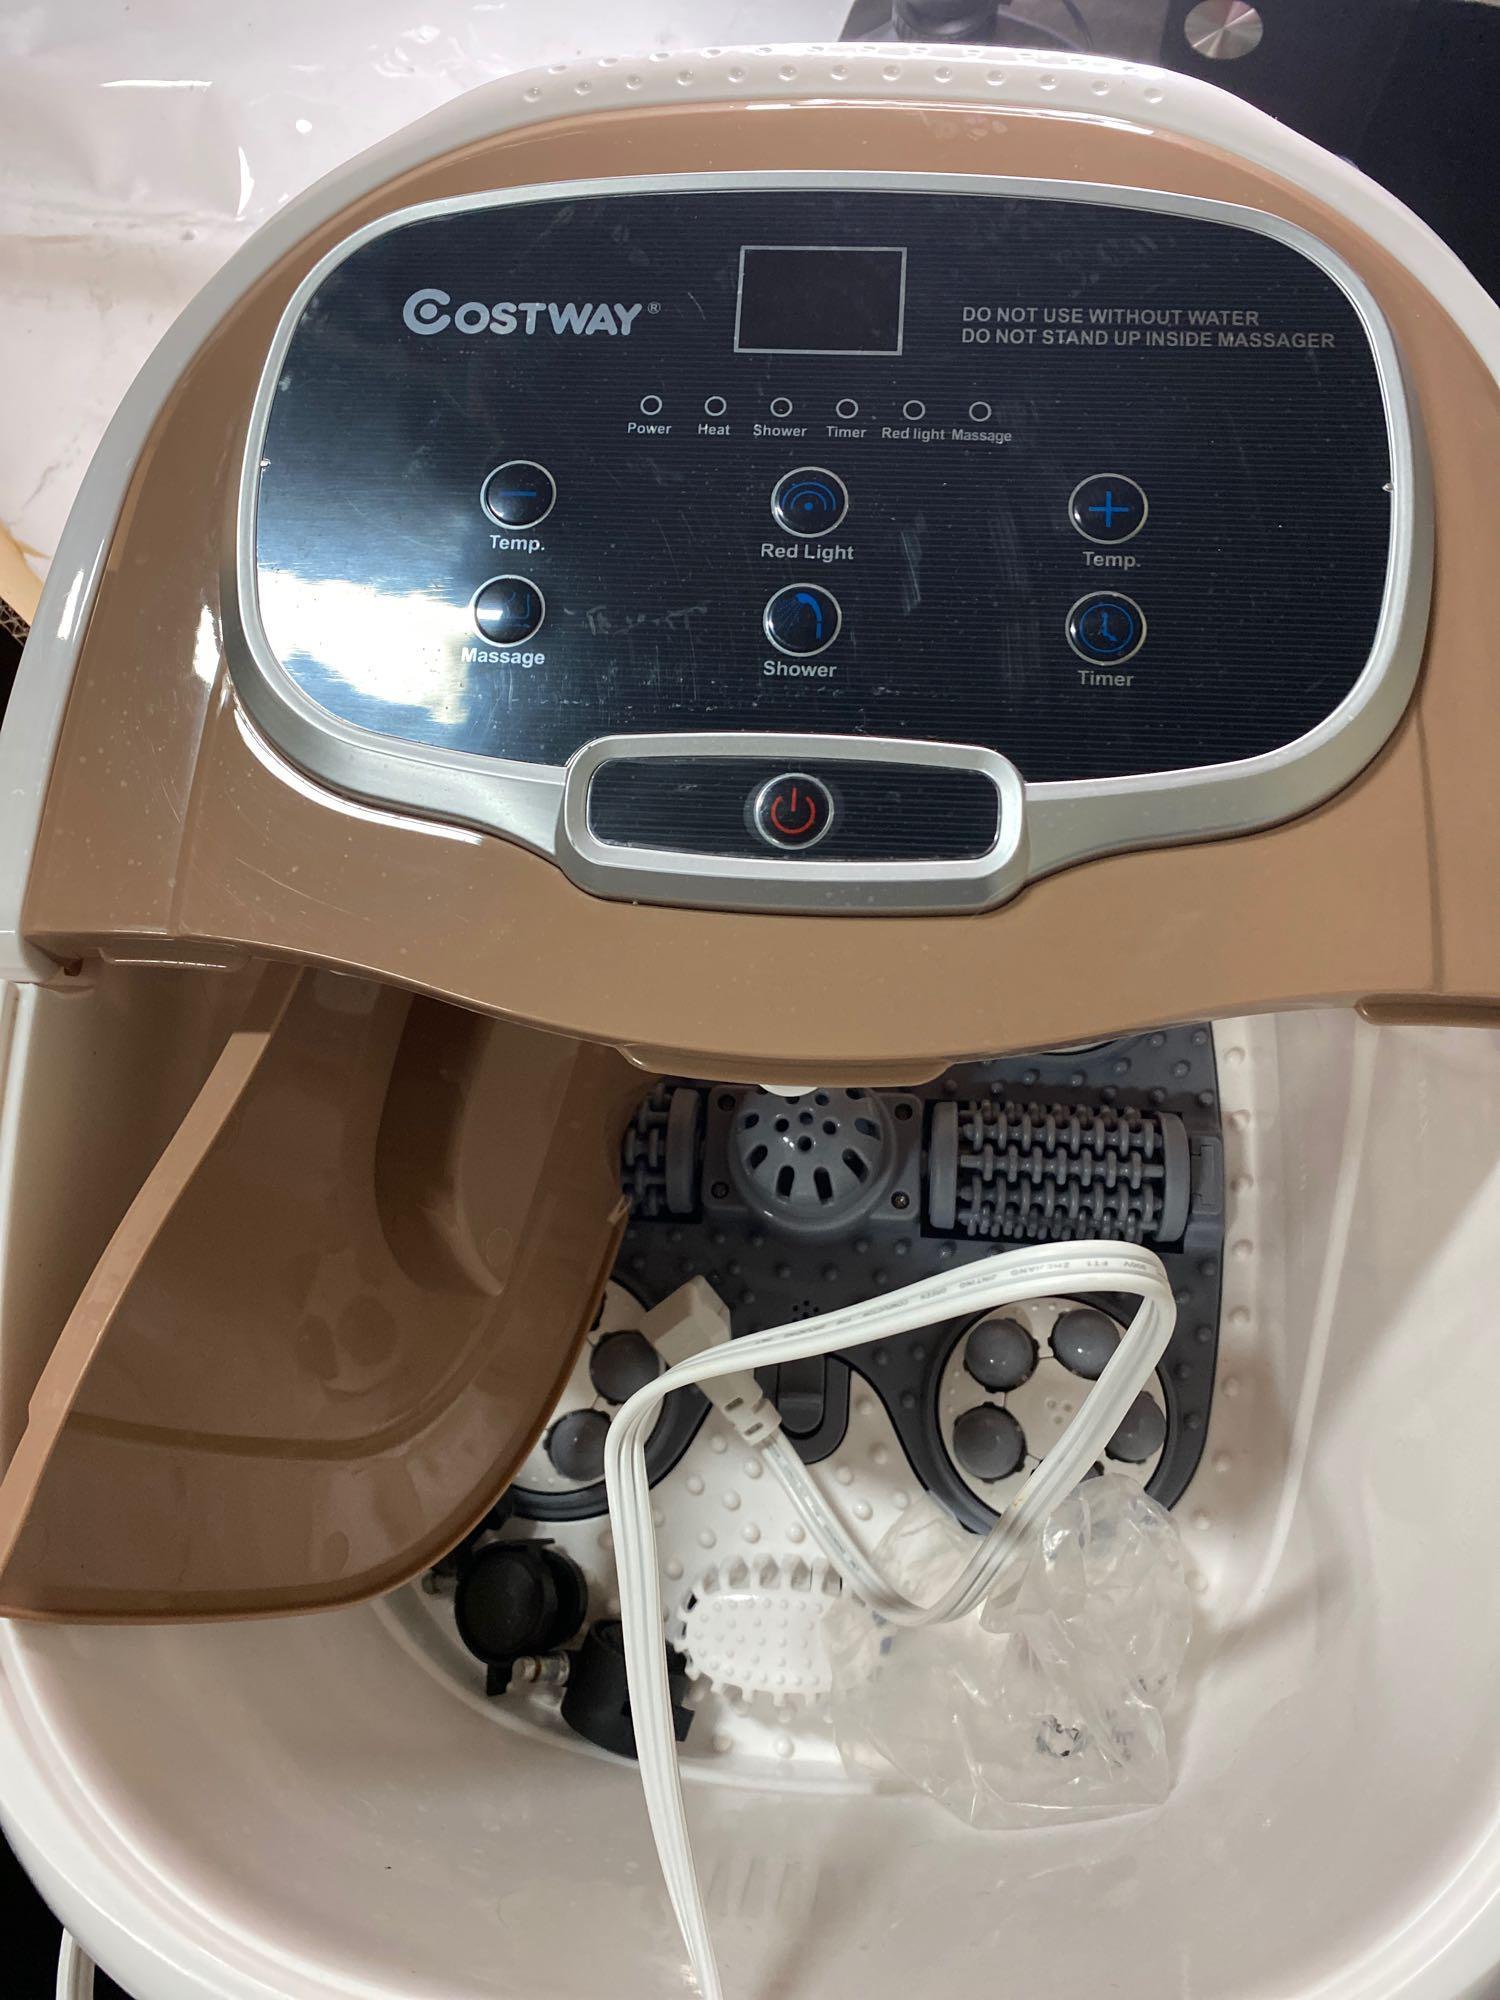 Portable Foot Spa Bath Motorized Massager with Shower-Coffee